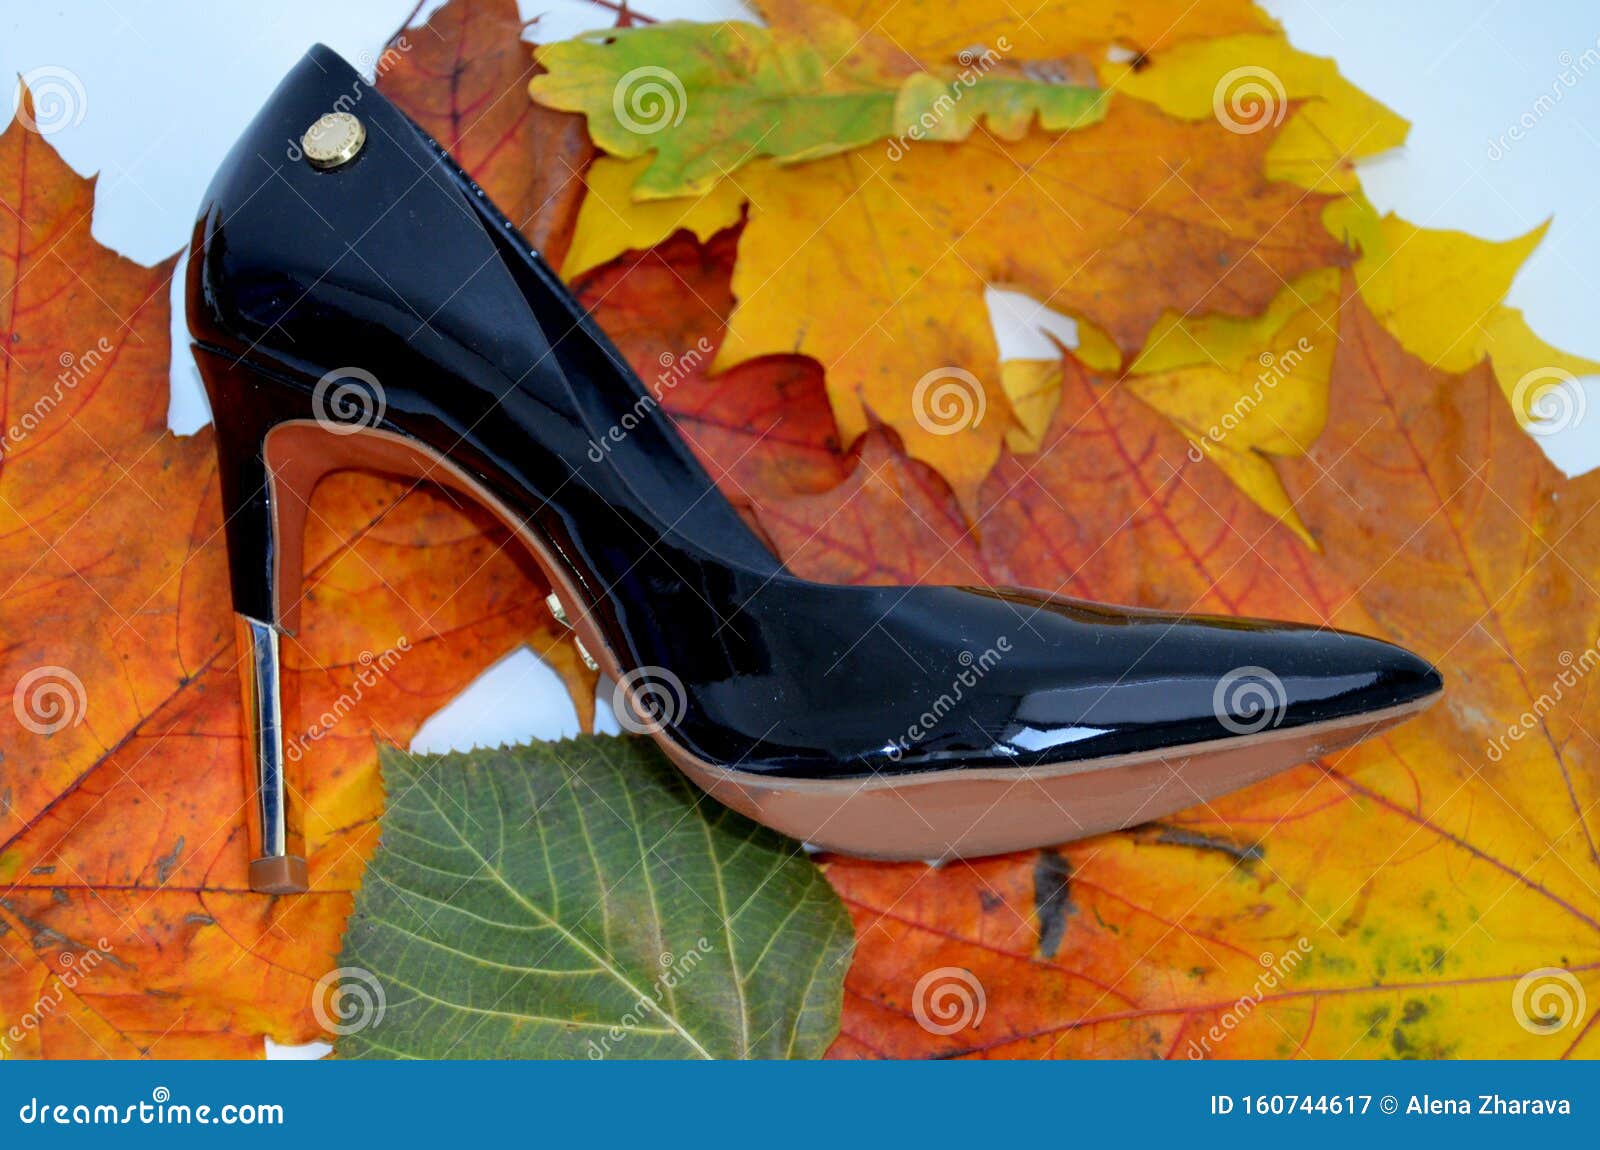 Black Shoes with Heels Made of Genuine Leather Stock Image - Image of ...